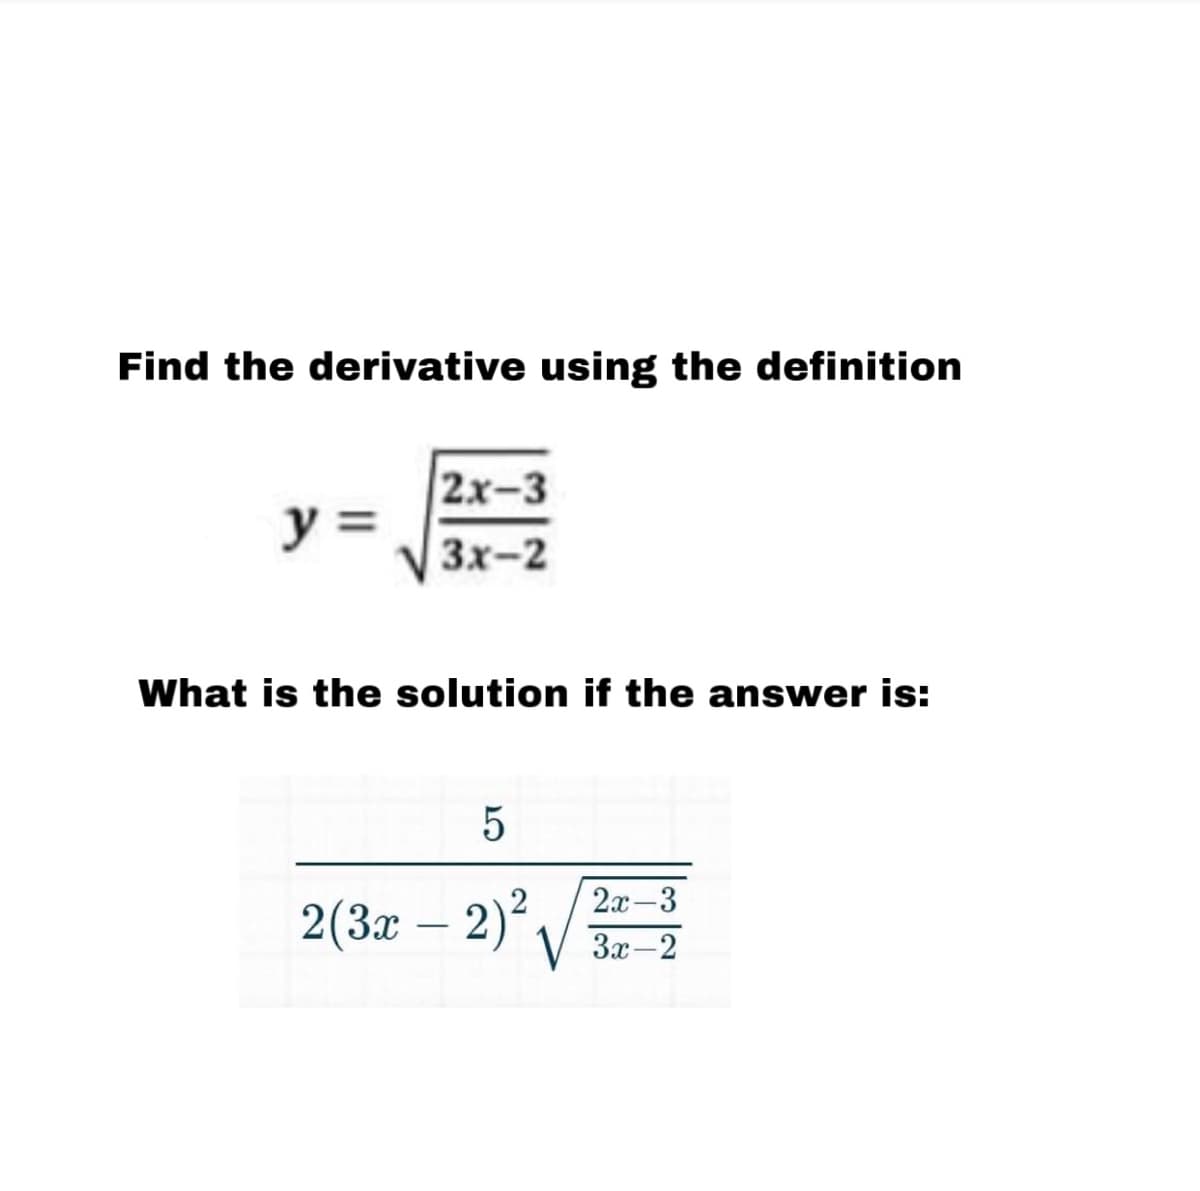 Find the derivative using the definition
2х-3
y =
3x-2
What is the solution if the answer is:
2х-3
2(3æ – 2) /
V 3x-2
